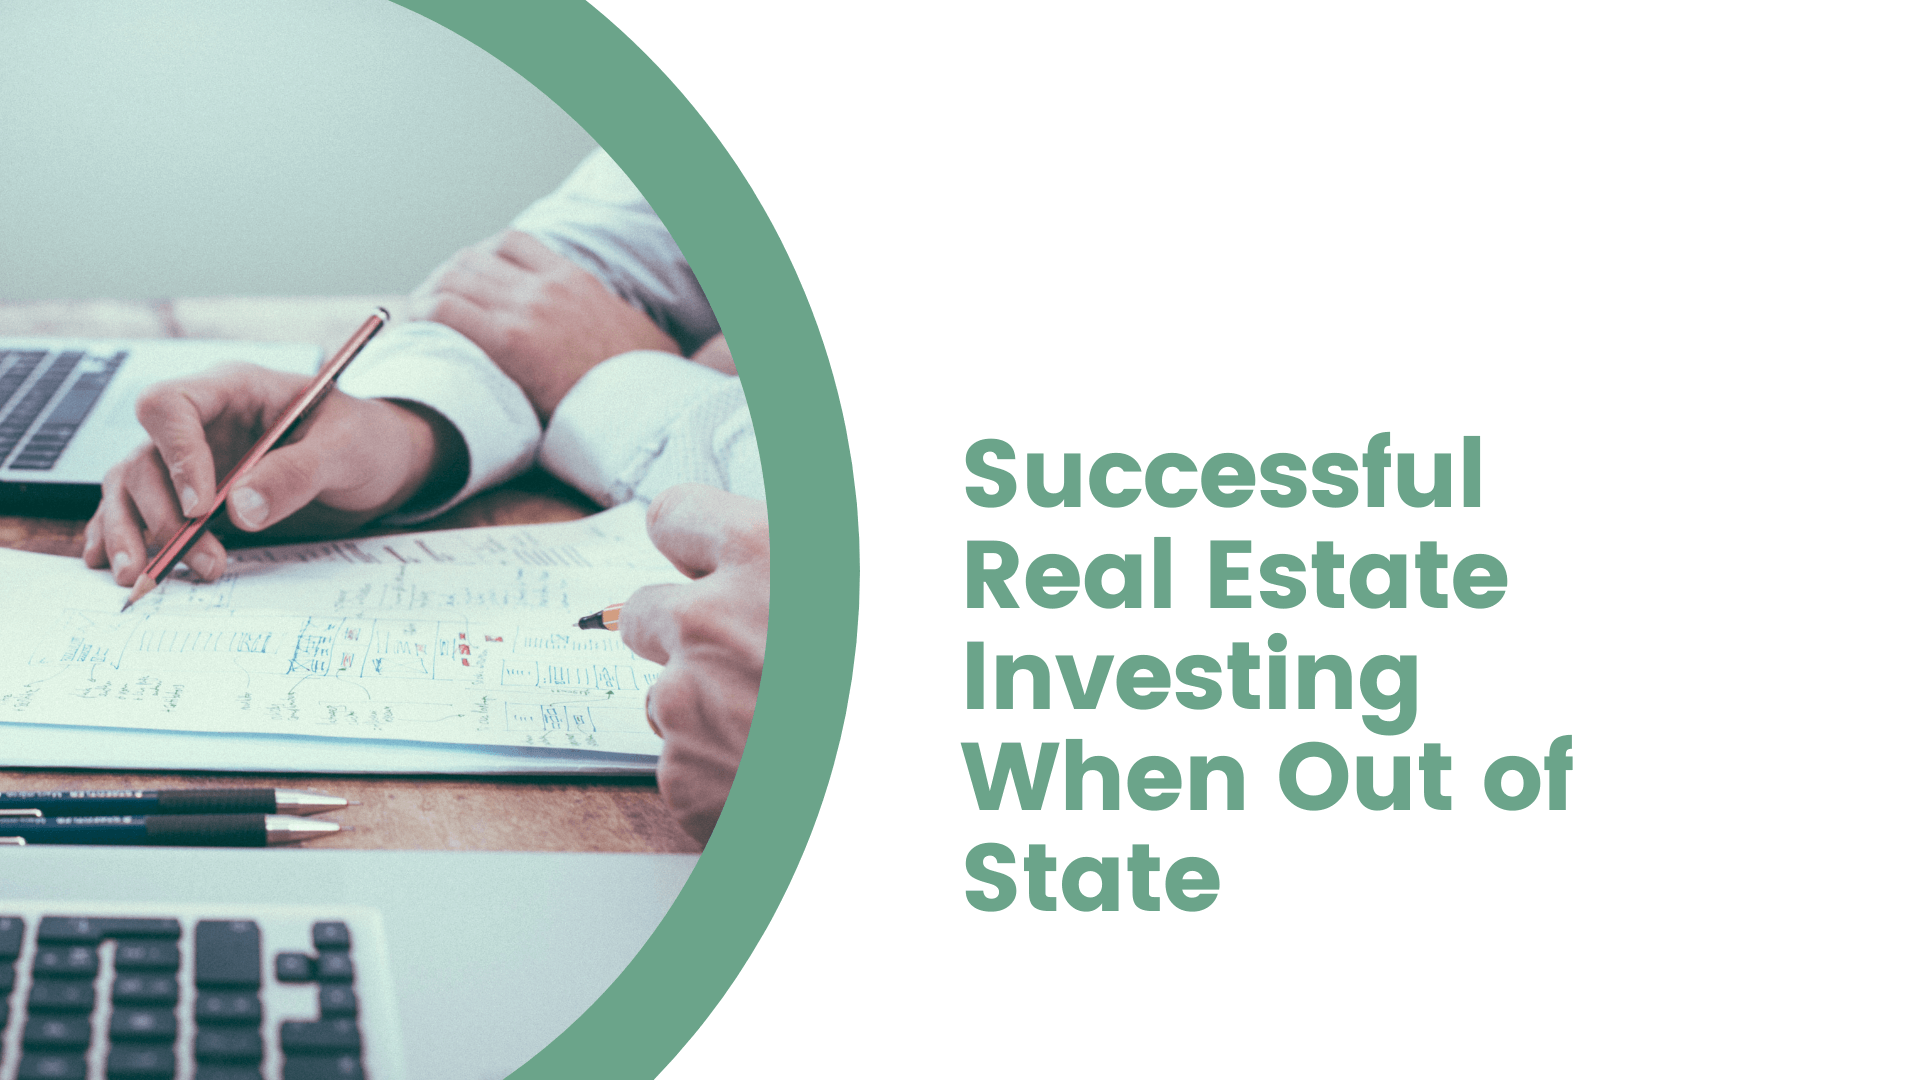 Successful Real Estate Investing When Out of State | Charlotte Property Management Guide